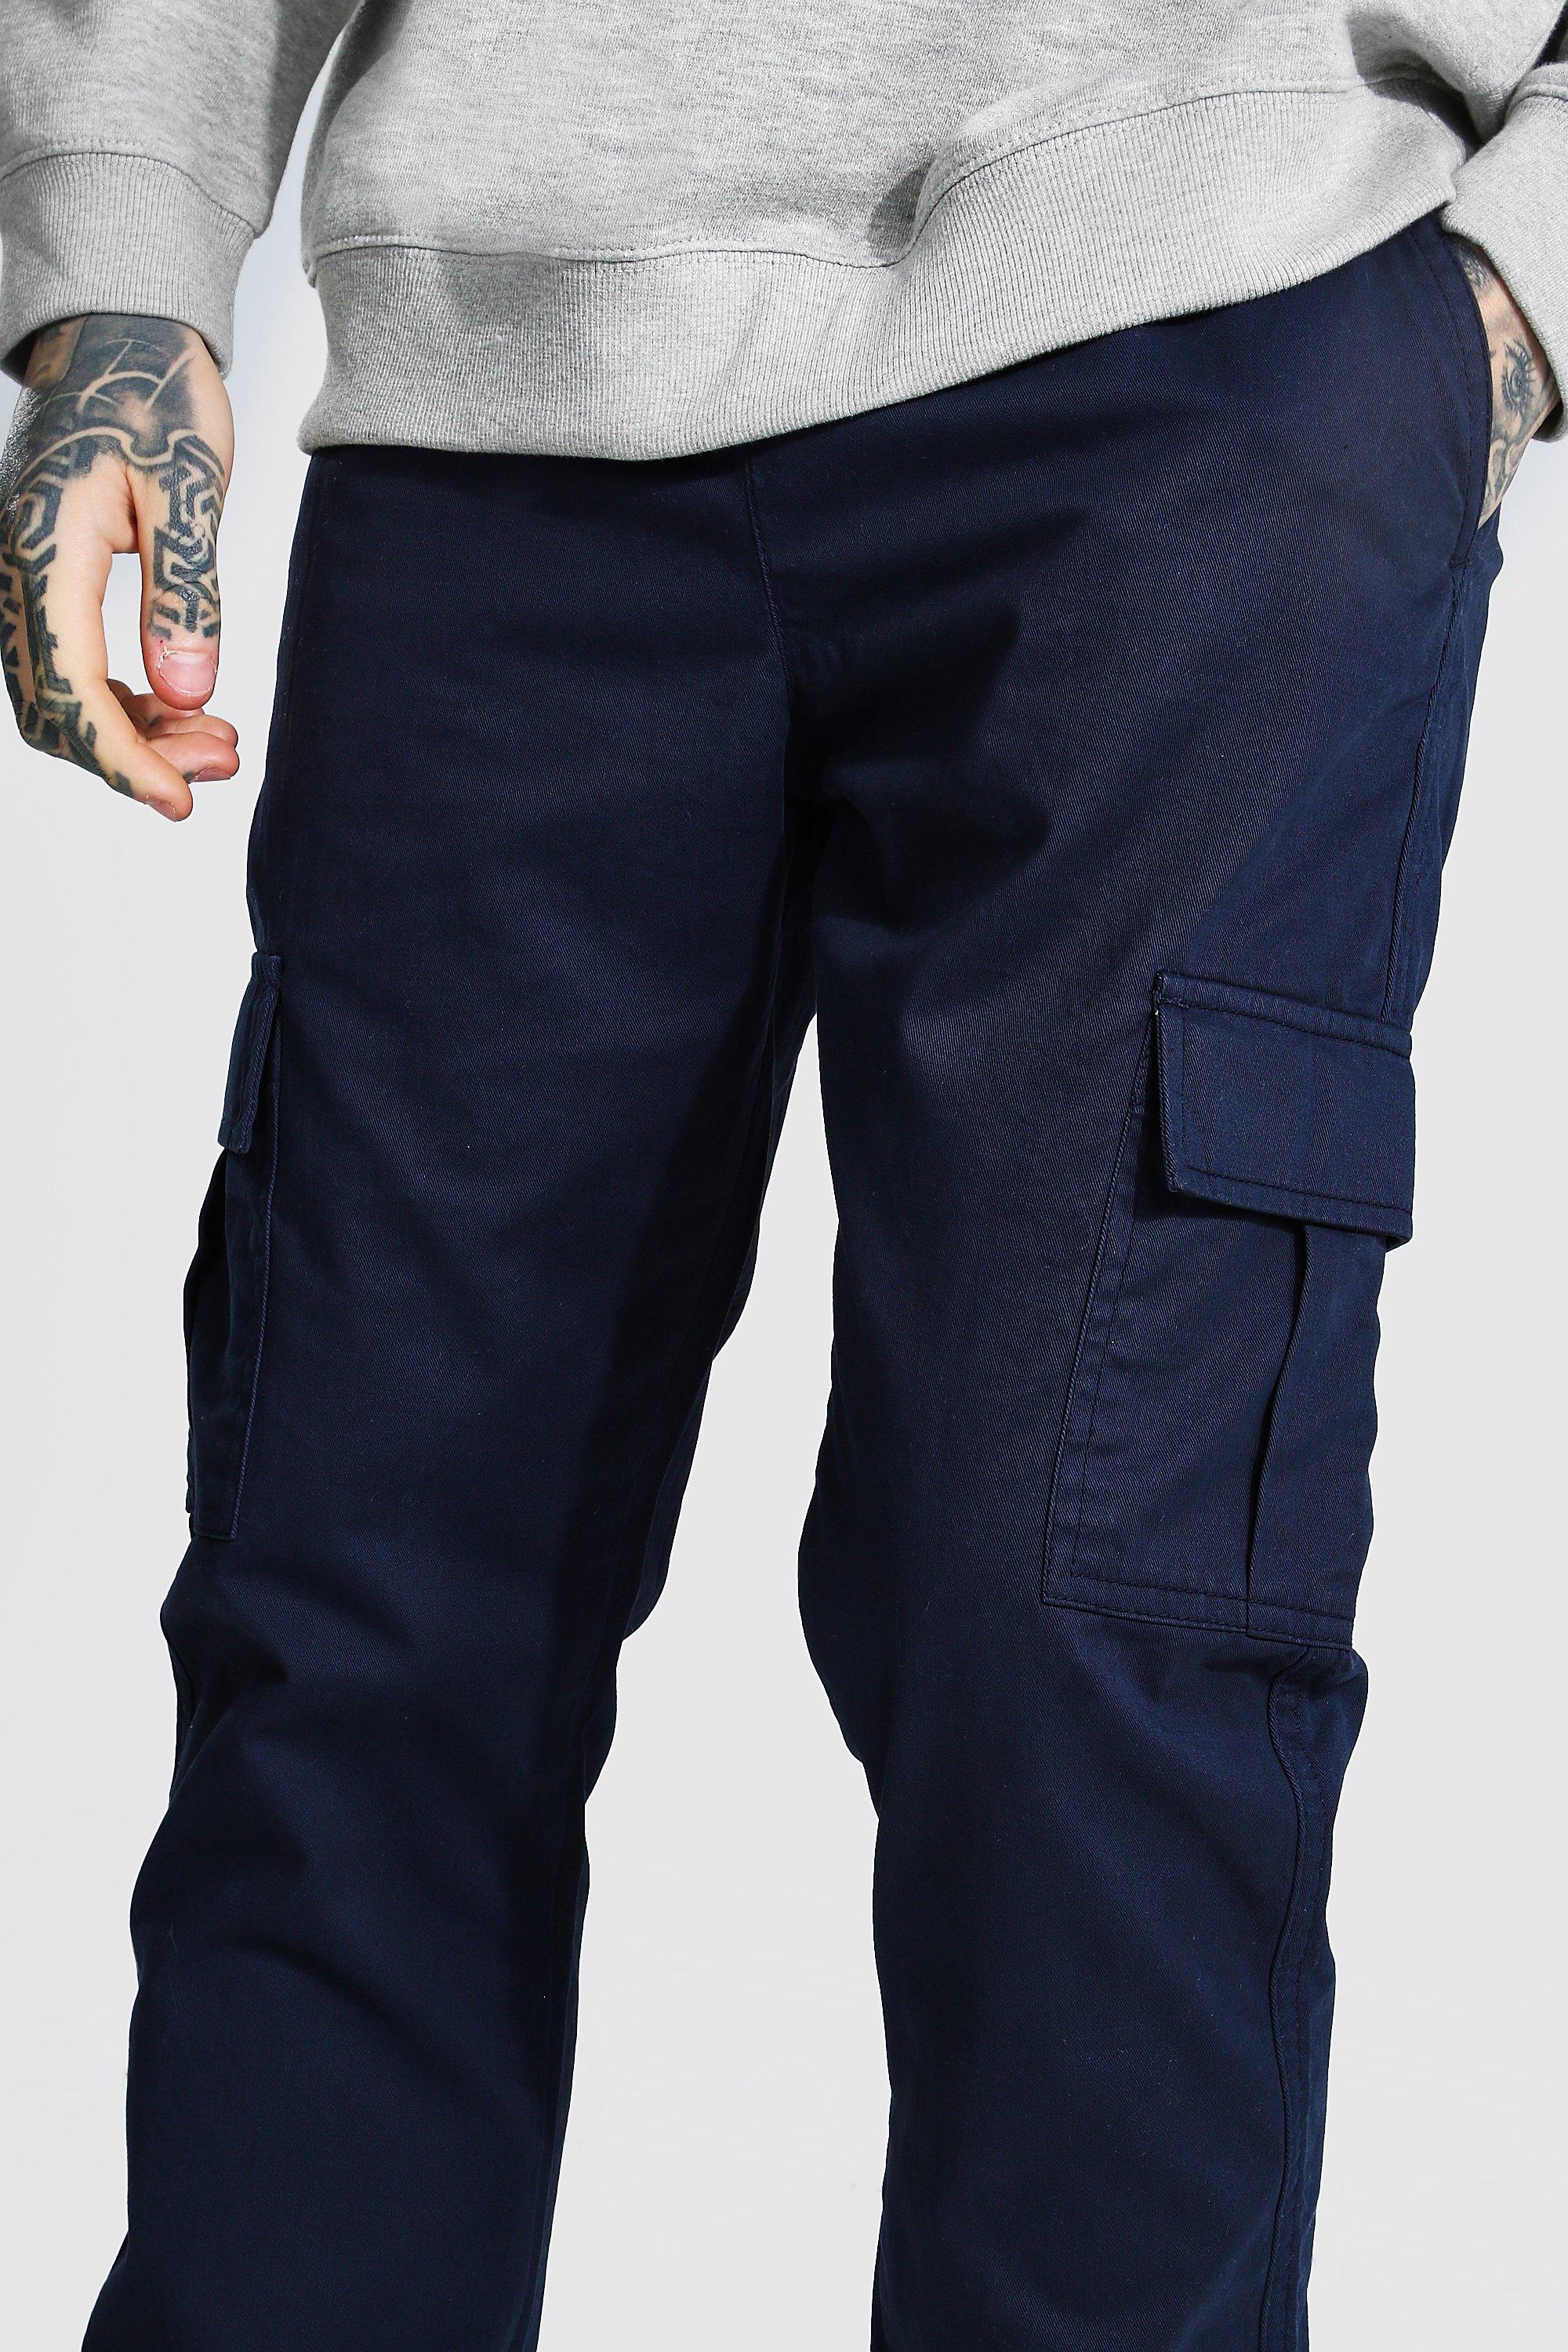 Buy Navy Blue Cargo Combat Trousers from the Next UK online shop